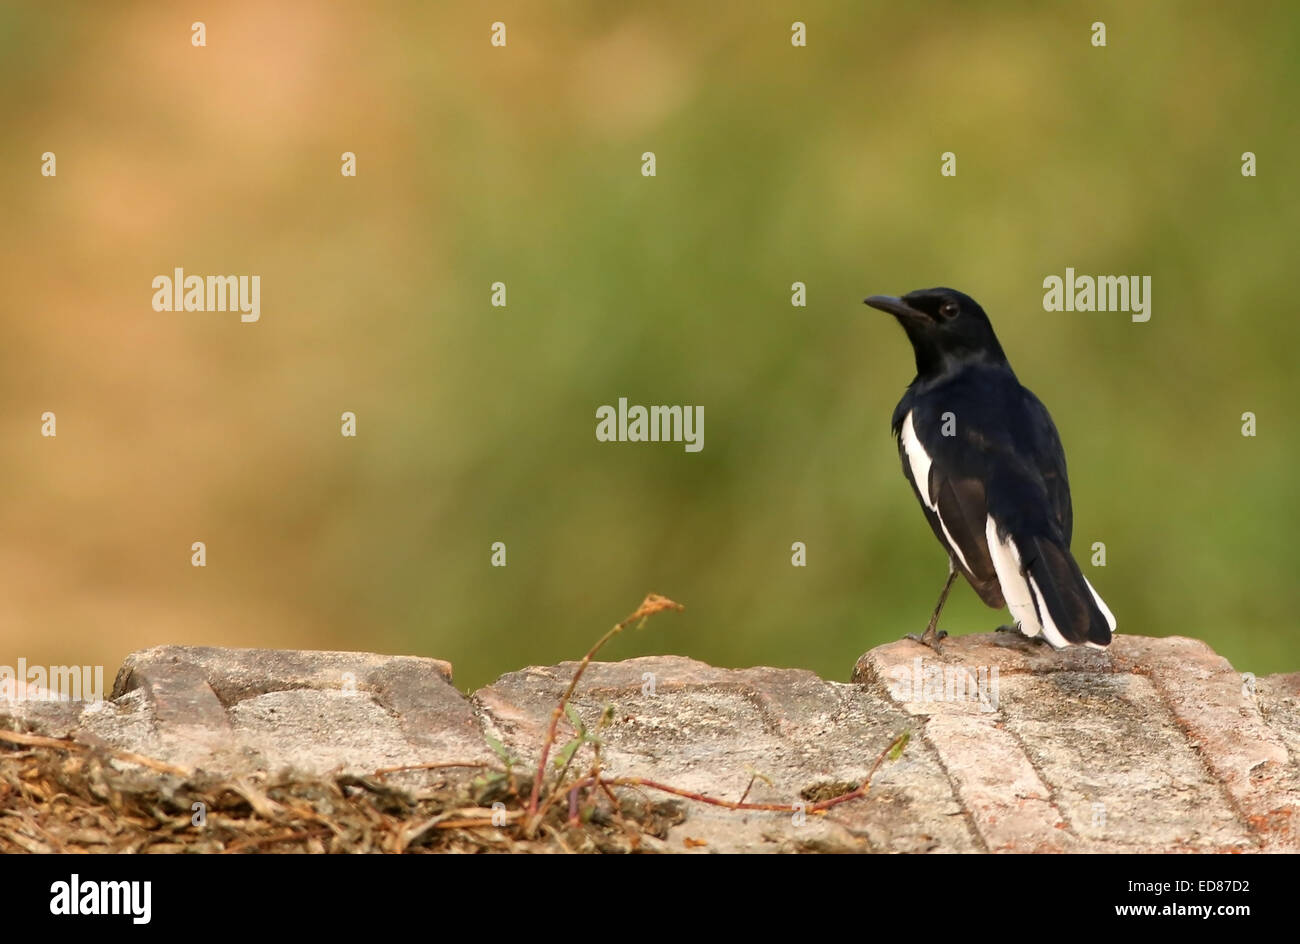 Single Magpie robin standing outdoor Stock Photo